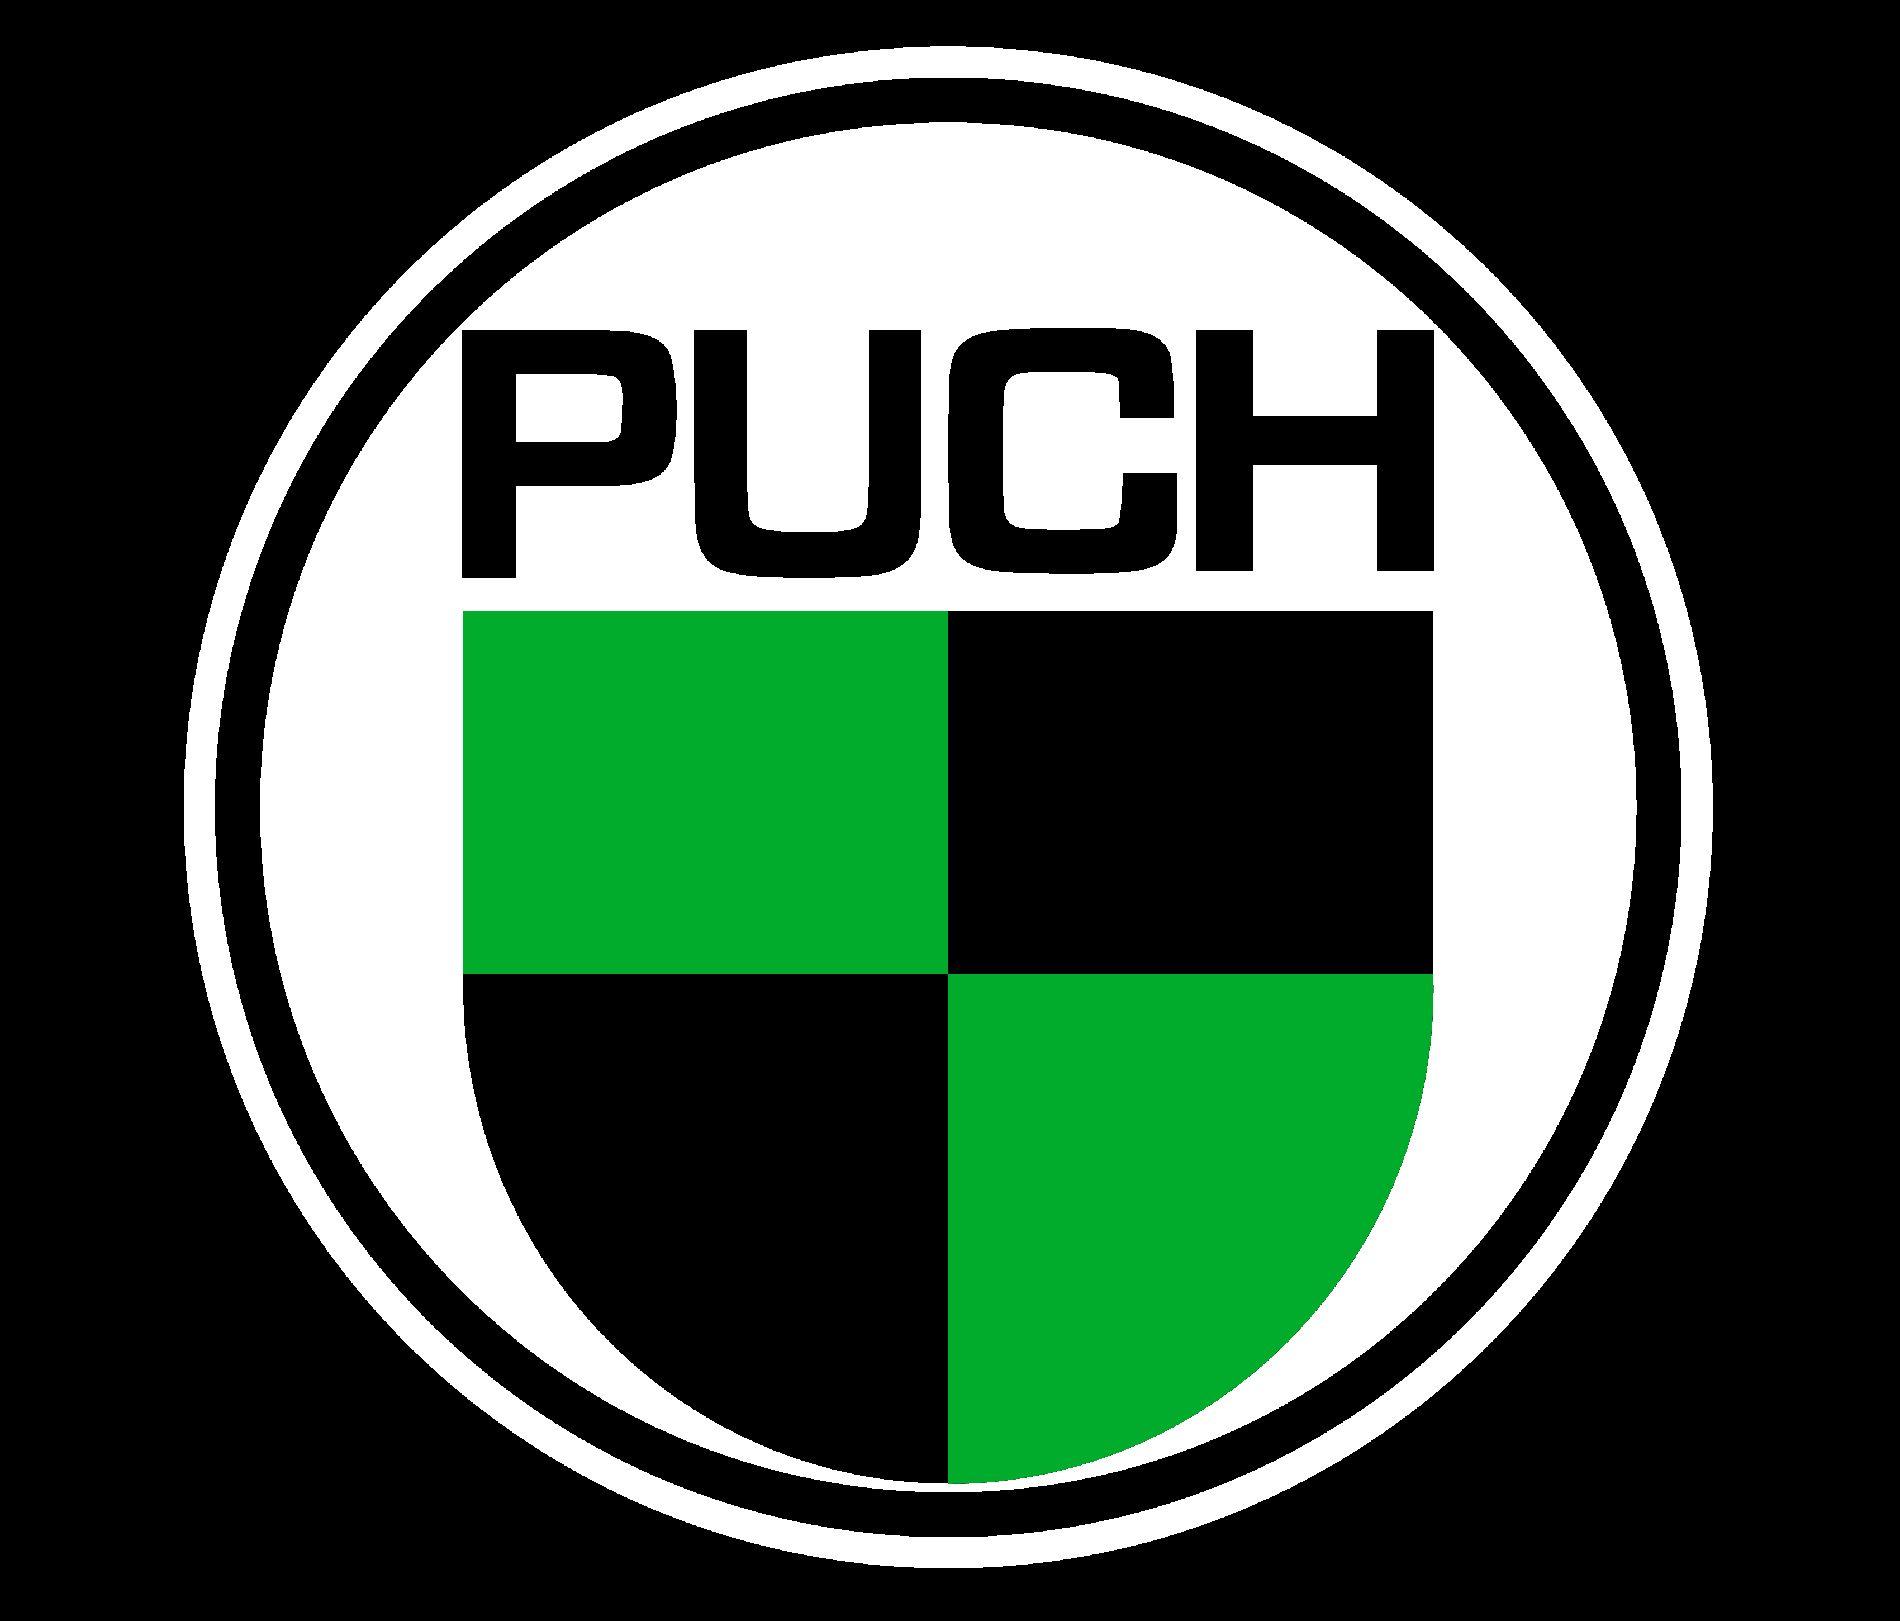 Puch Logo - Puch Logo. Motorcycle brands: logo, specs, history